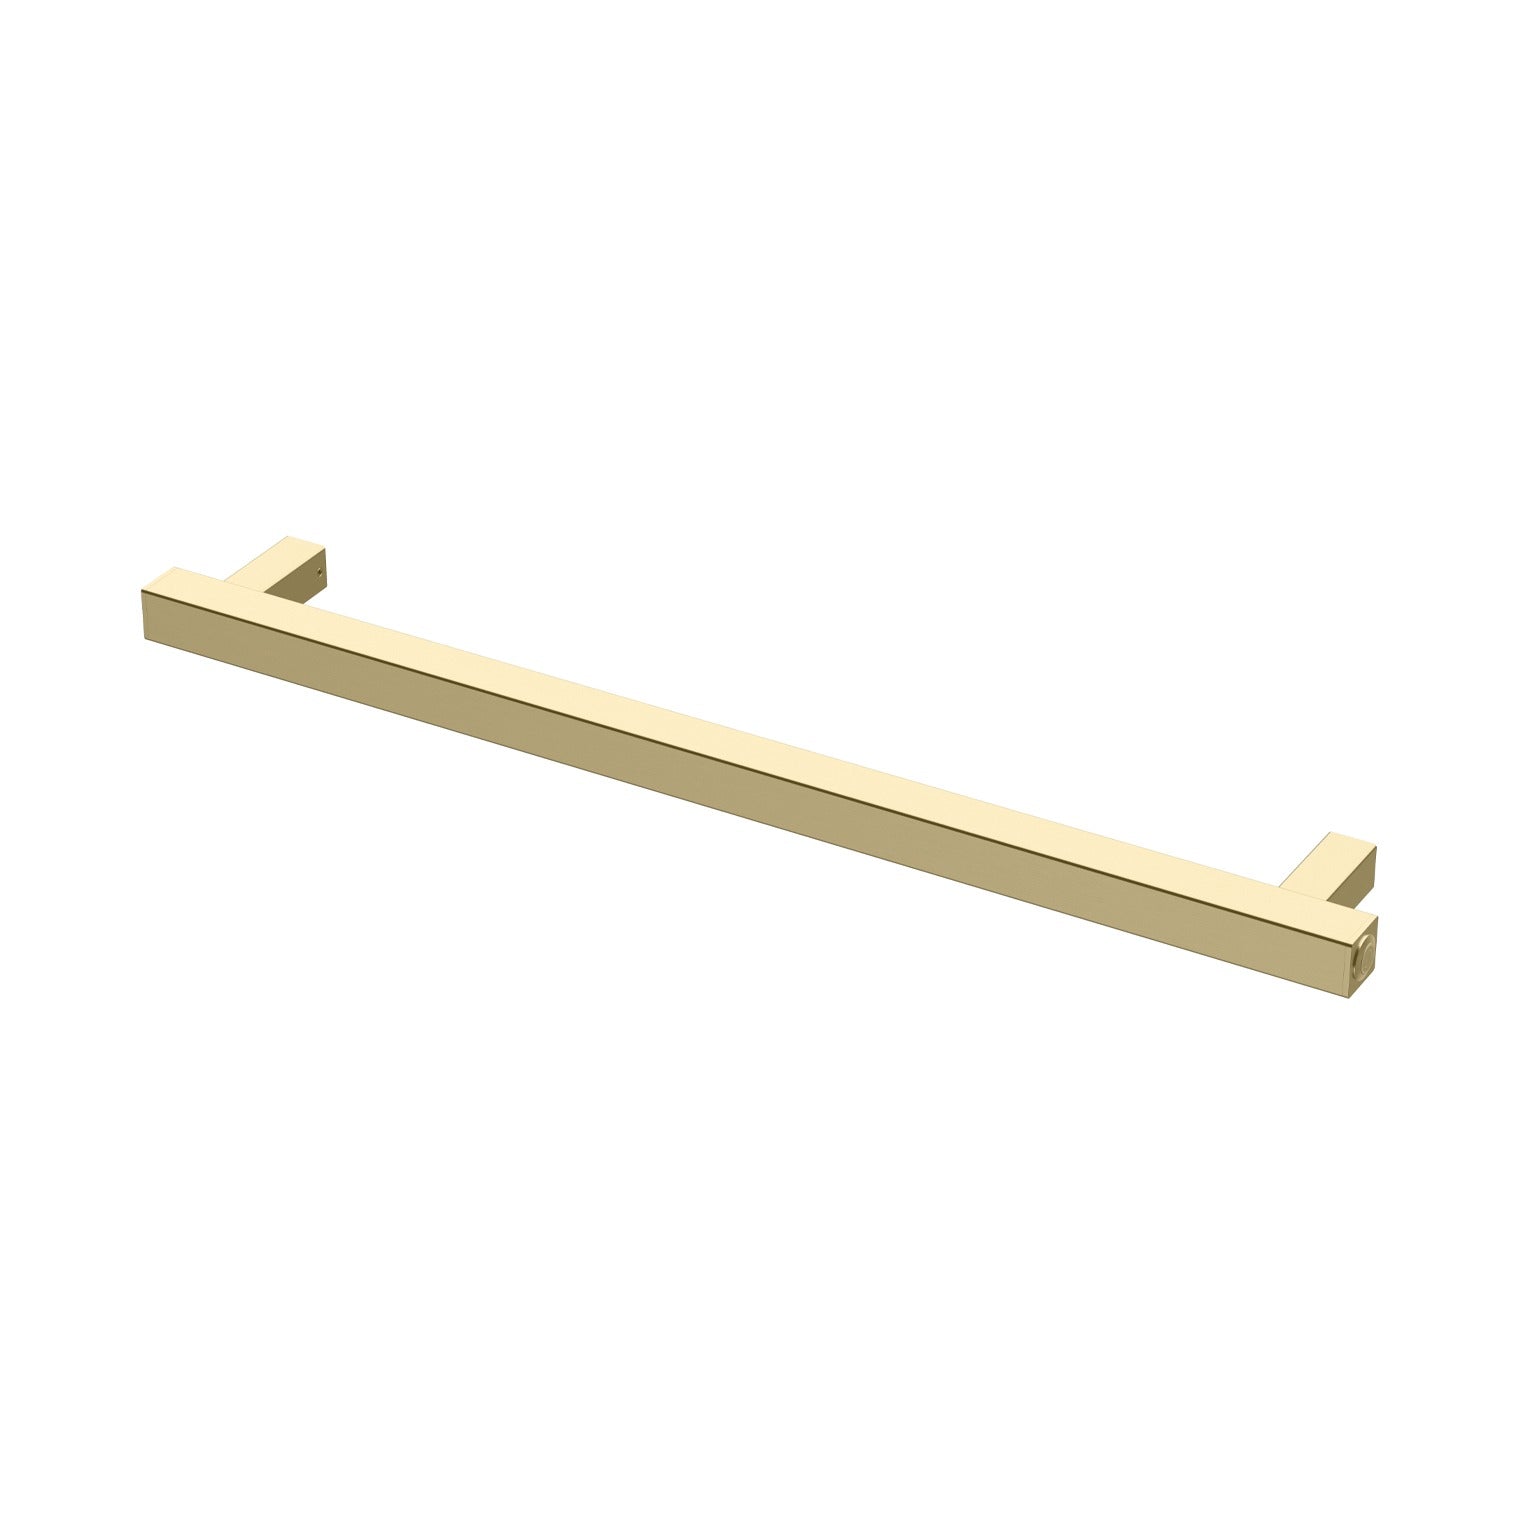 PHOENIX SQUARE SINGLE HEATED TOWEL RAIL BRUSHED GOLD (AVAILABLE IN 600MM AND 800MM)